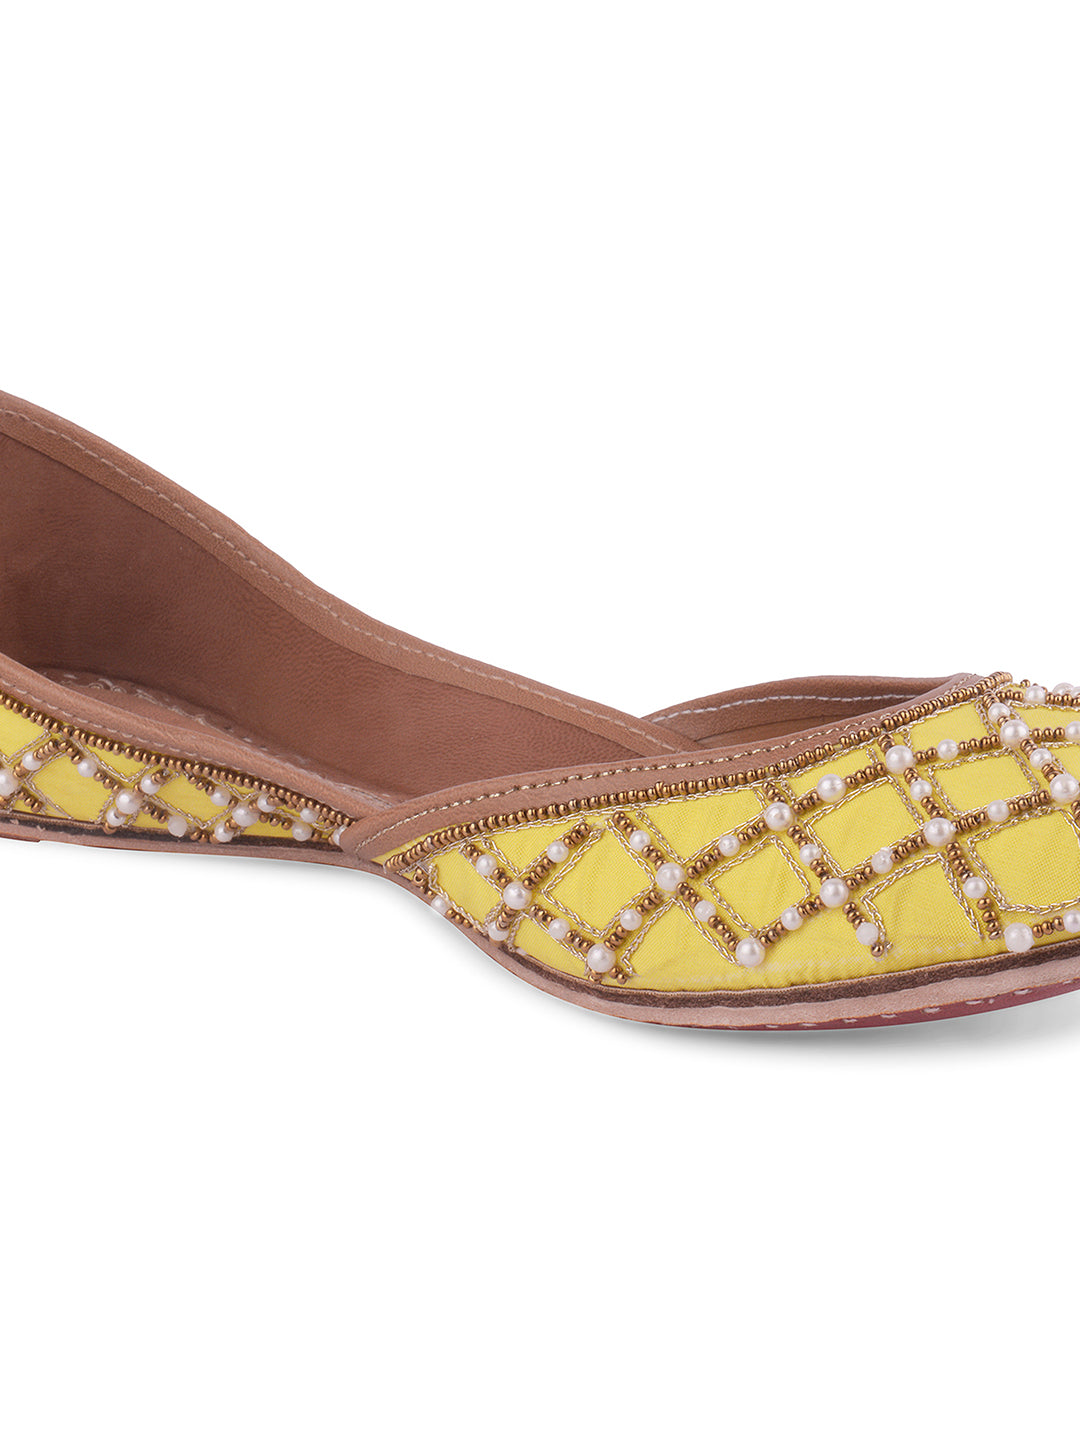 DESI COLOUR Women Brown Solid Leather Open Toe Flats